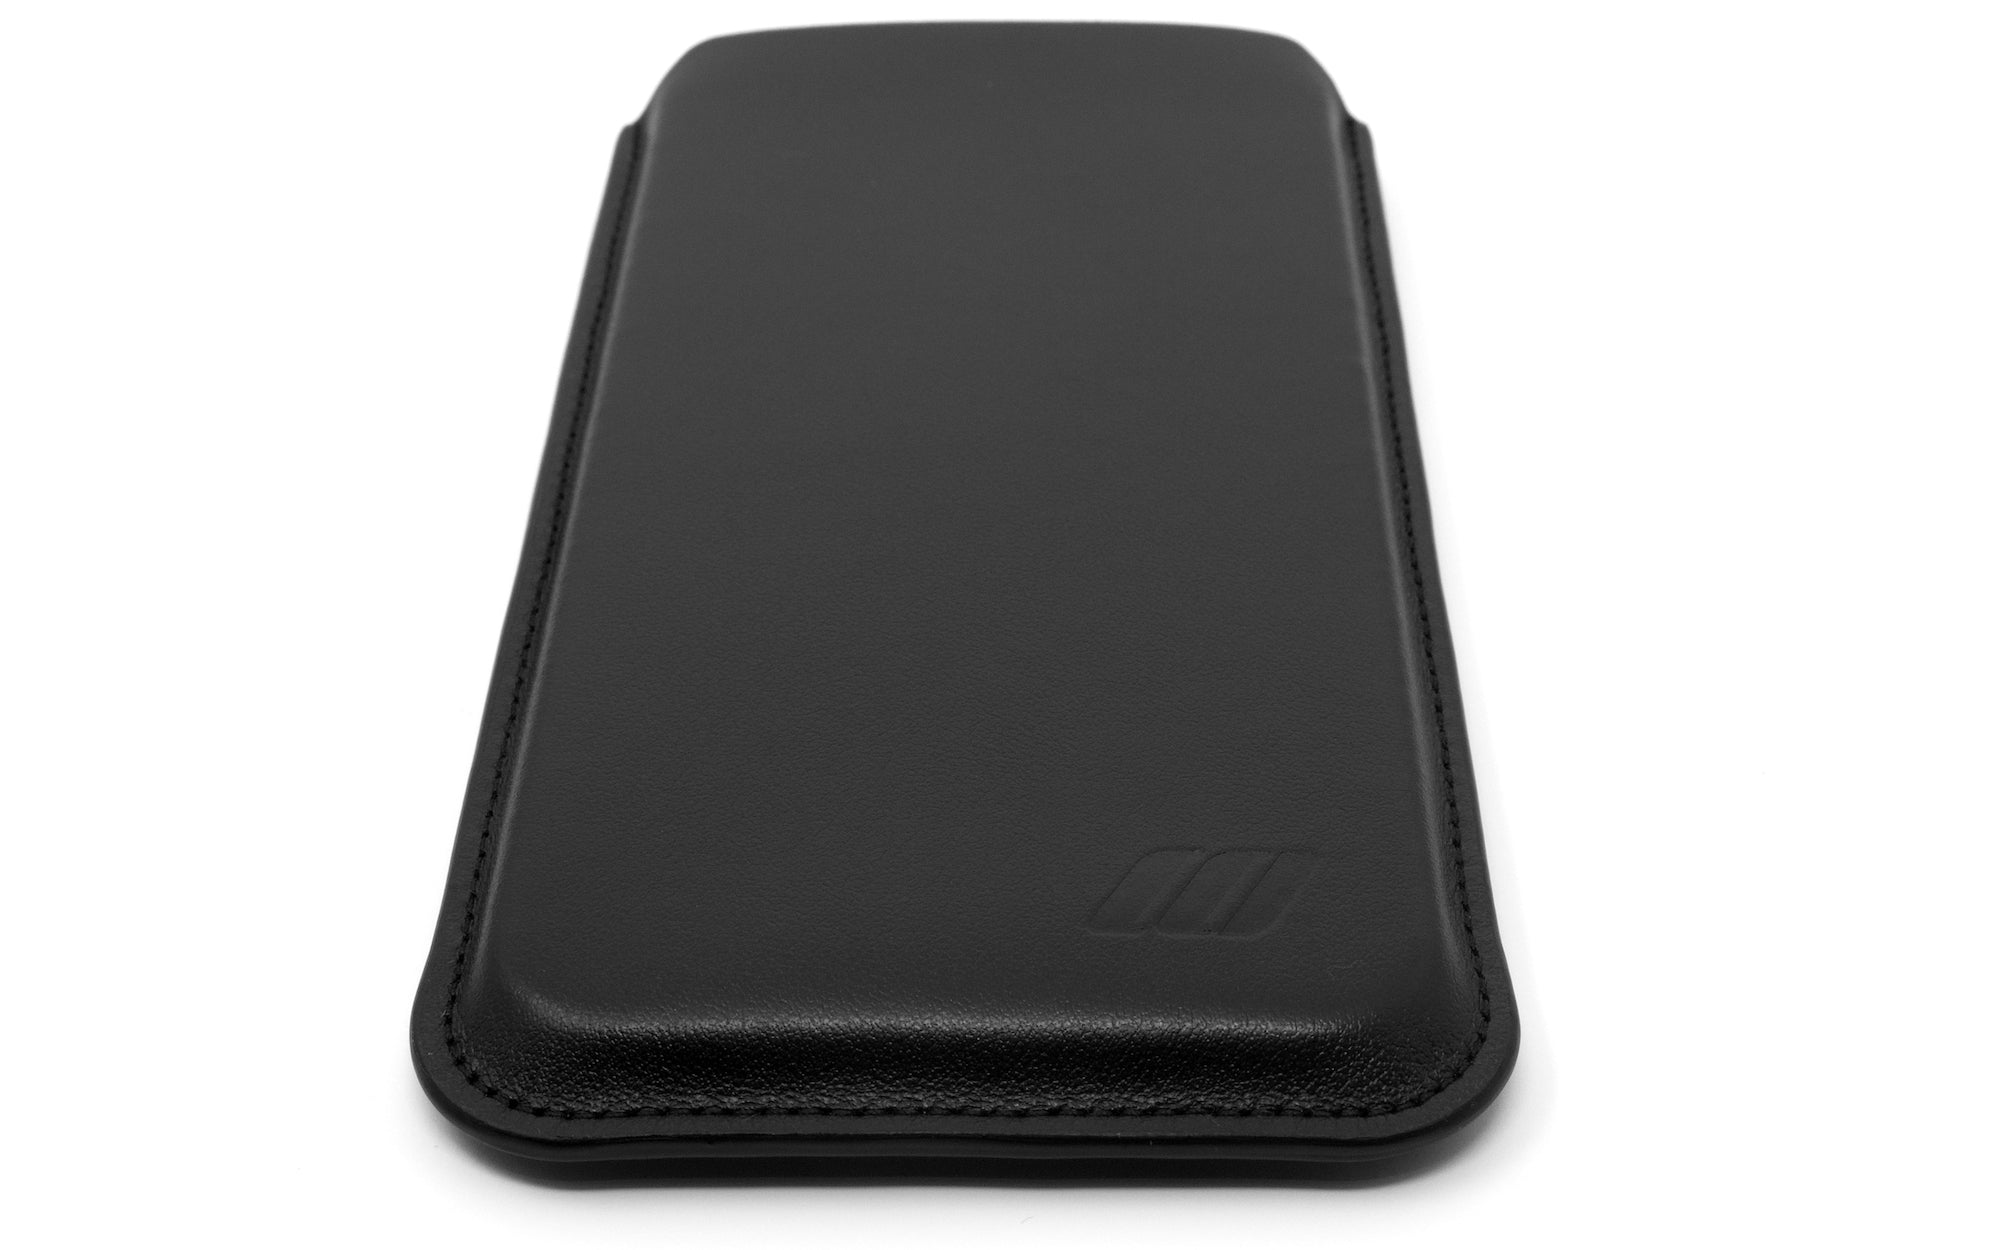 Apple iPhone 14 Pro Max Leather Sleeve Case - Skinny Fit - Black